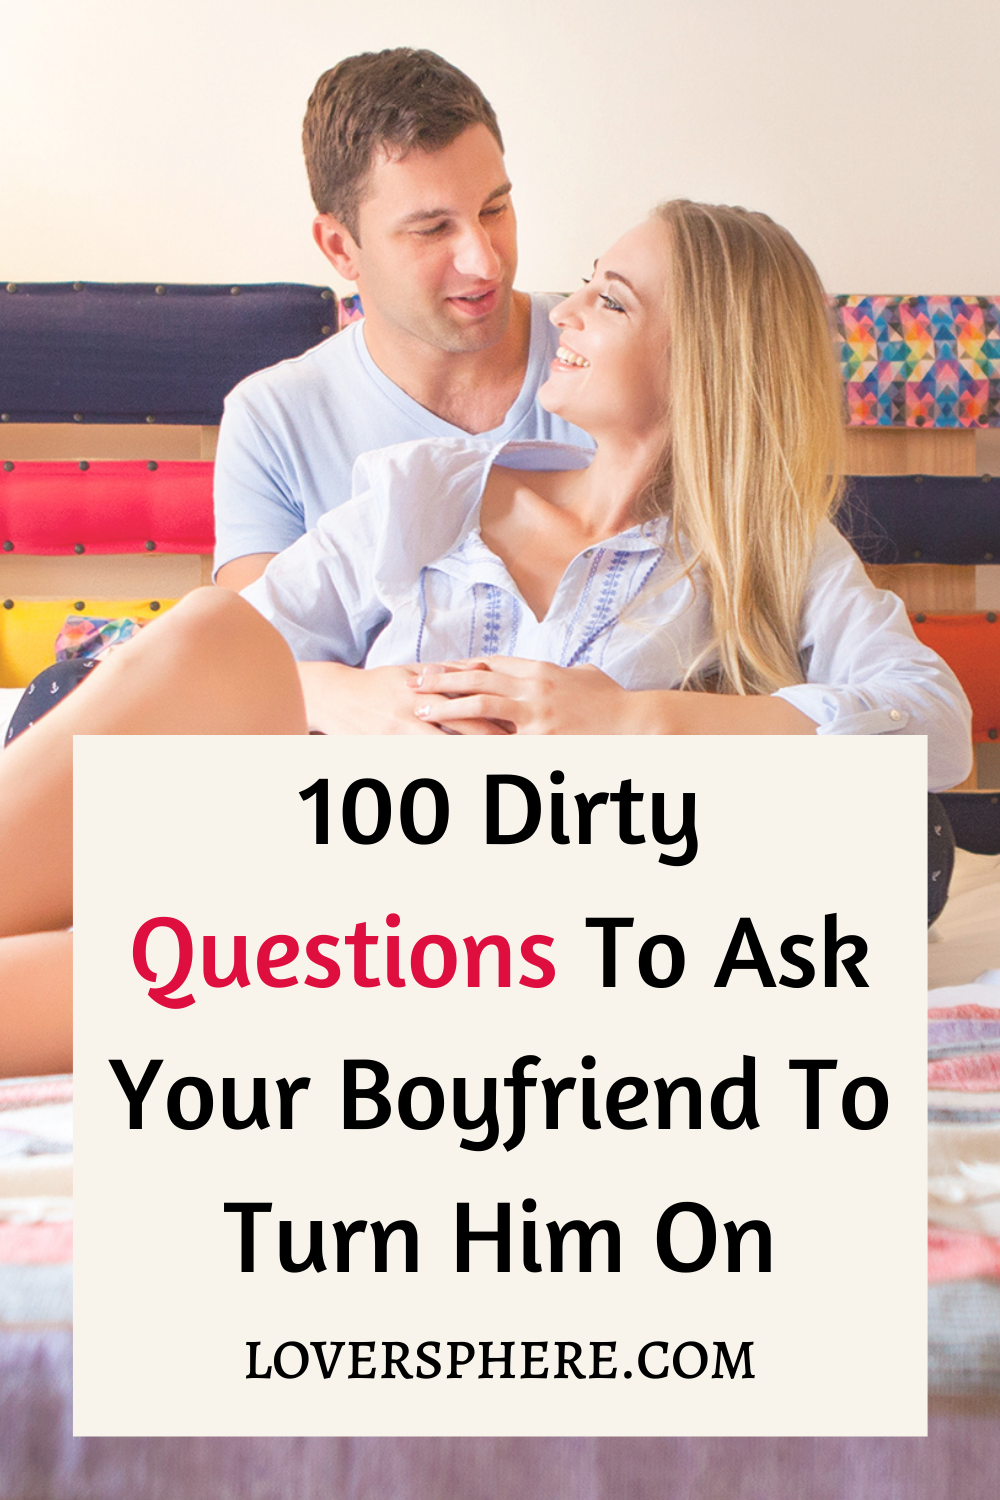 Deep relationship questions to ask your lover: According to beverly hills c...